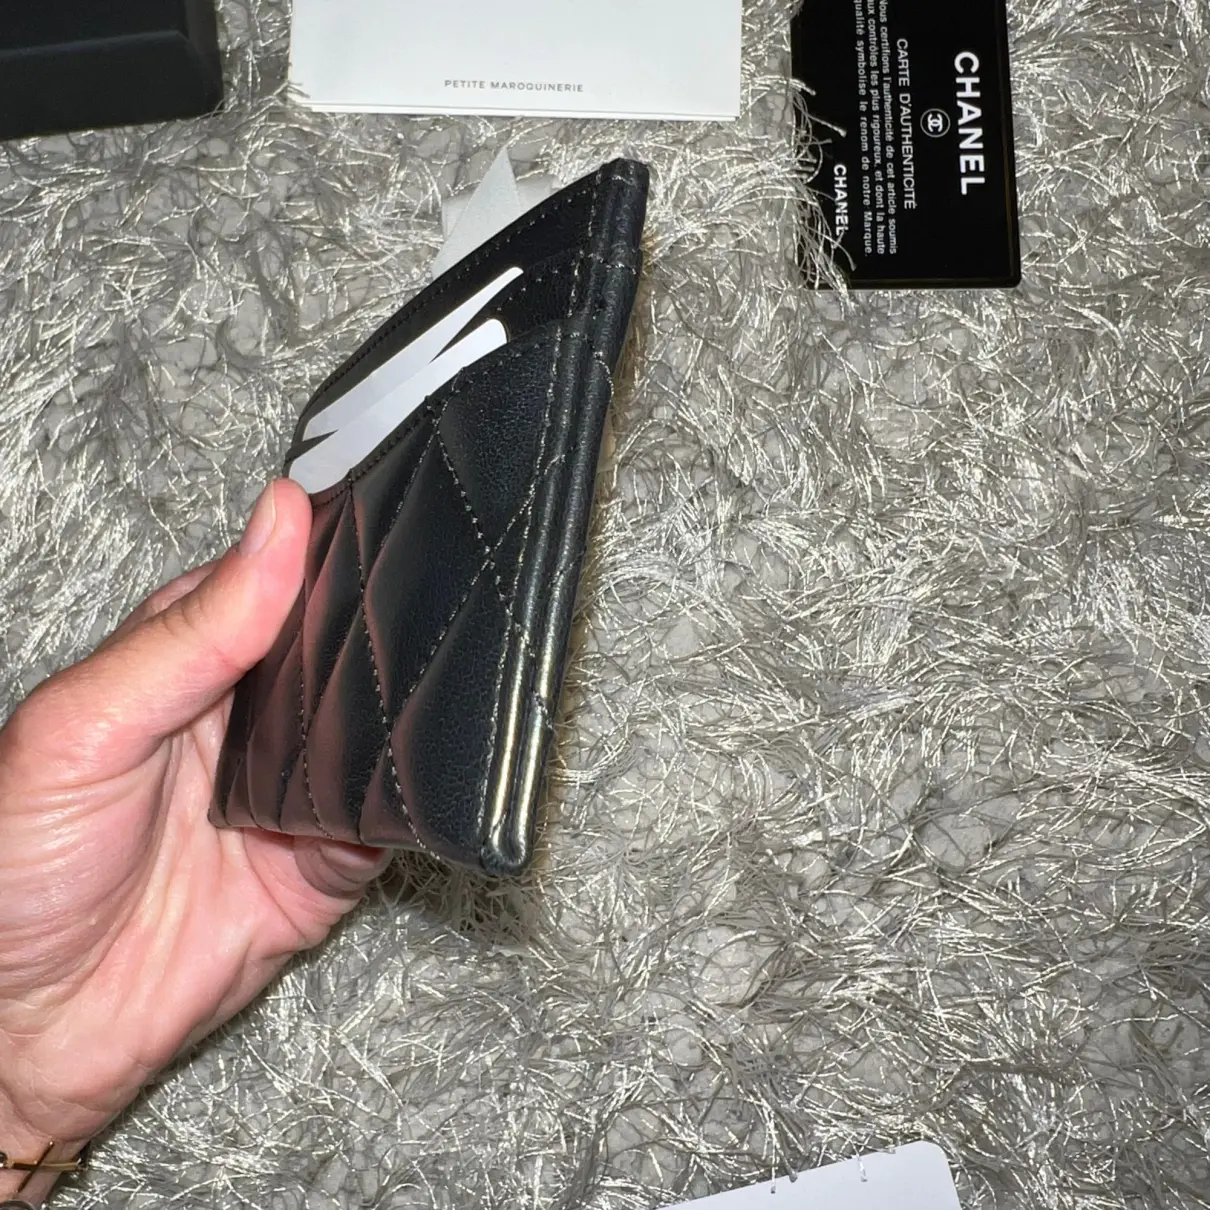 Leather card wallet Chanel